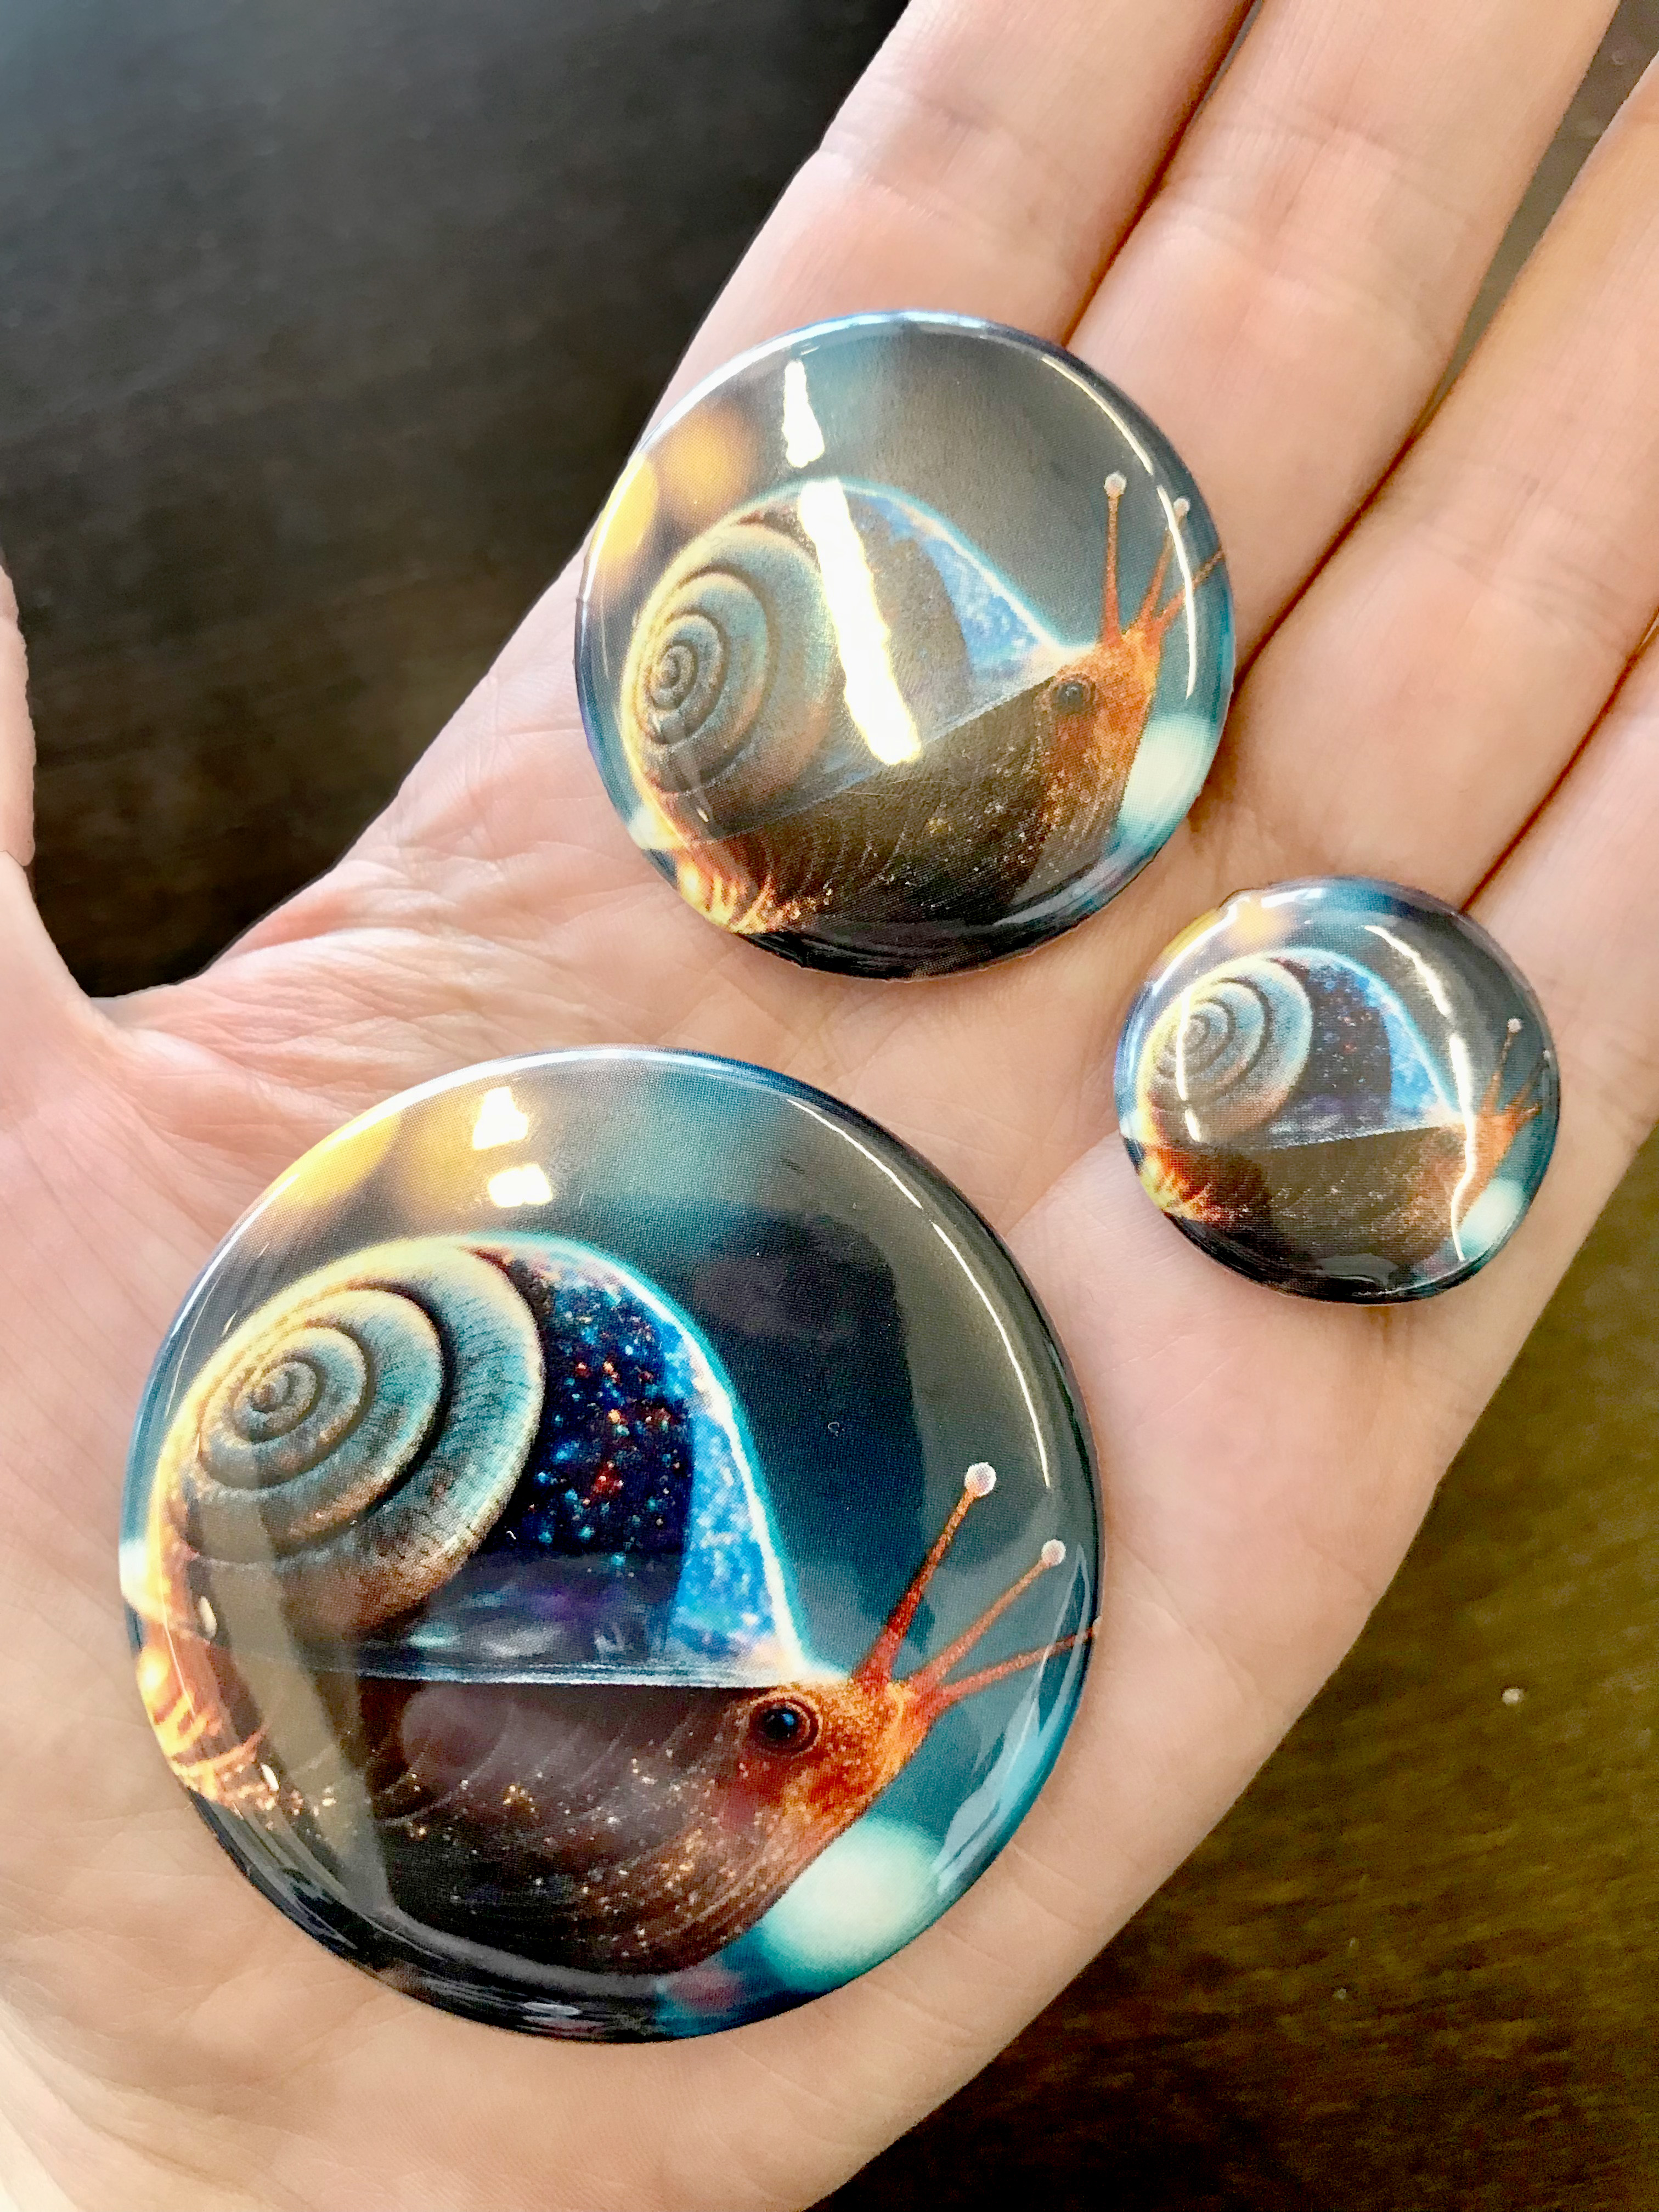 On an open palm sit three buttons of different sizes, each with a picture of a snail.